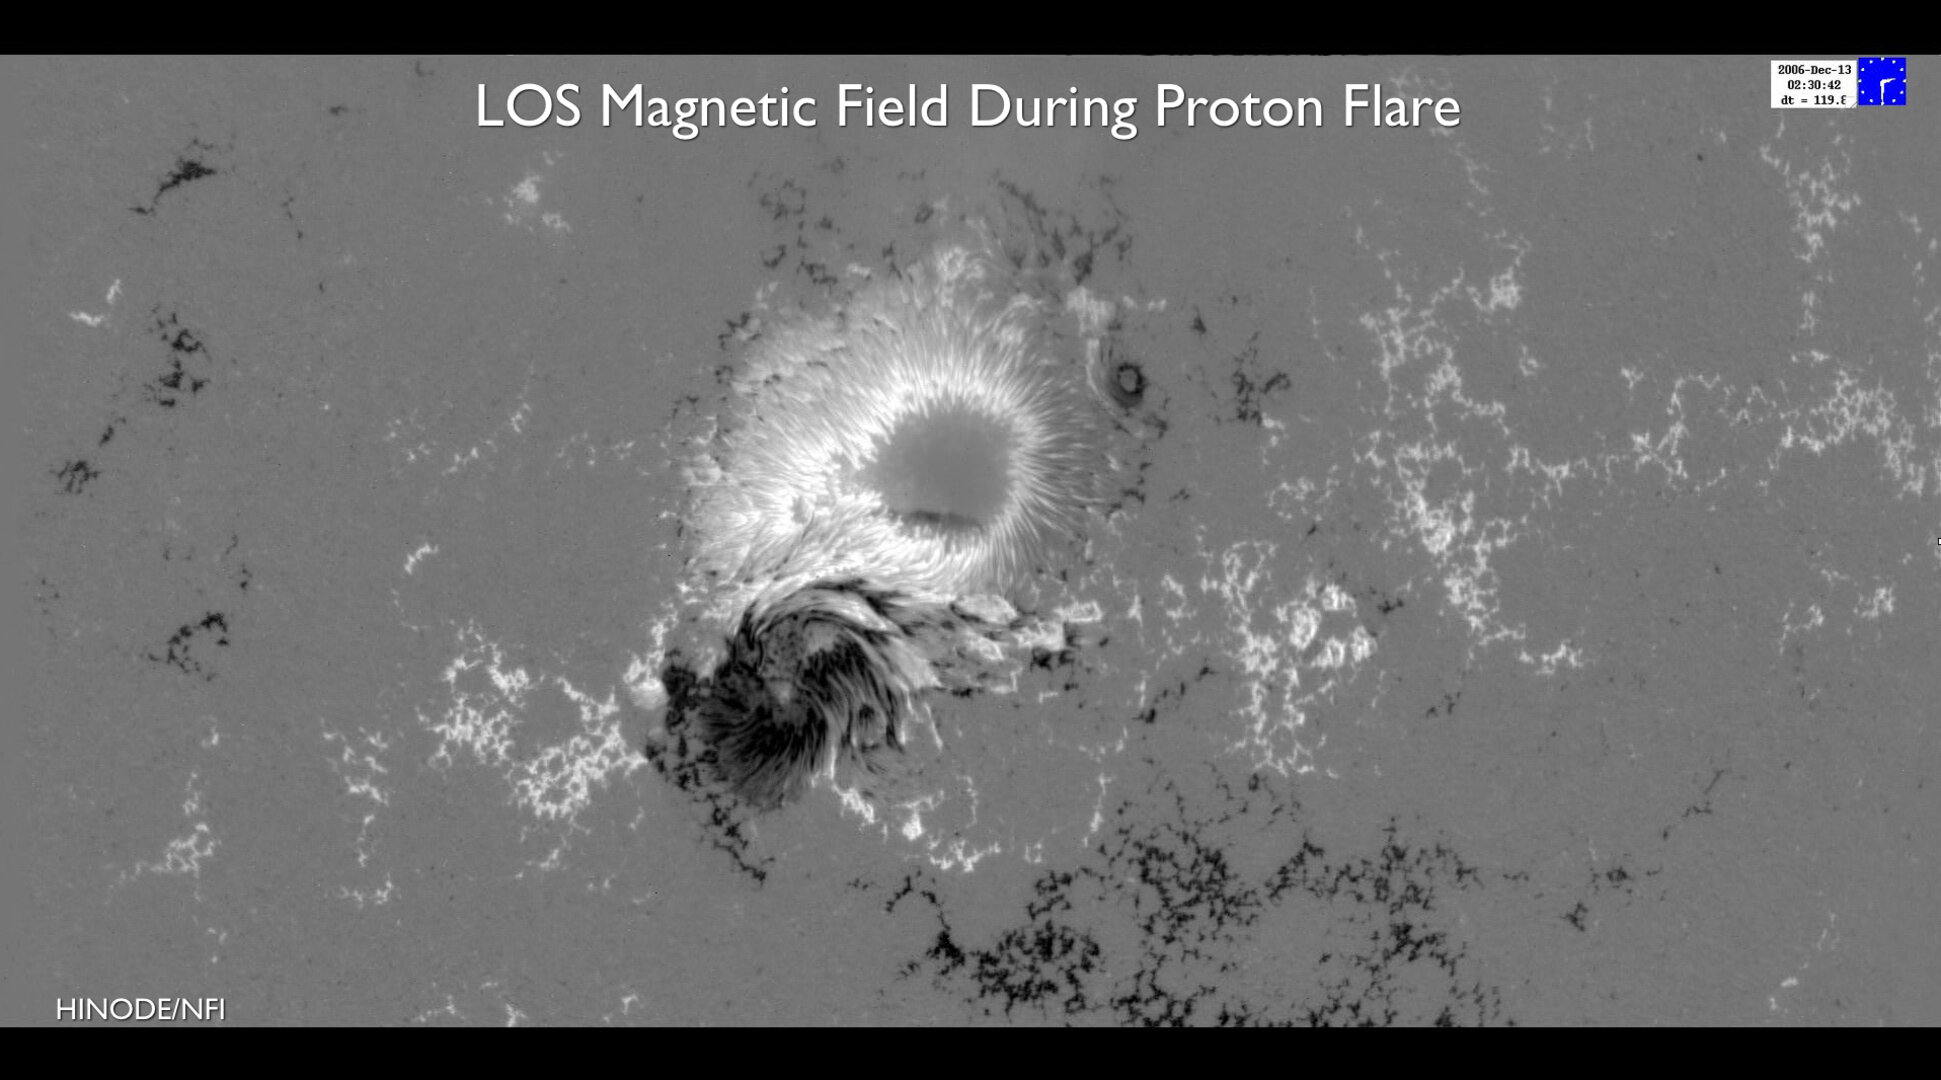 Sunspots collision causes flare